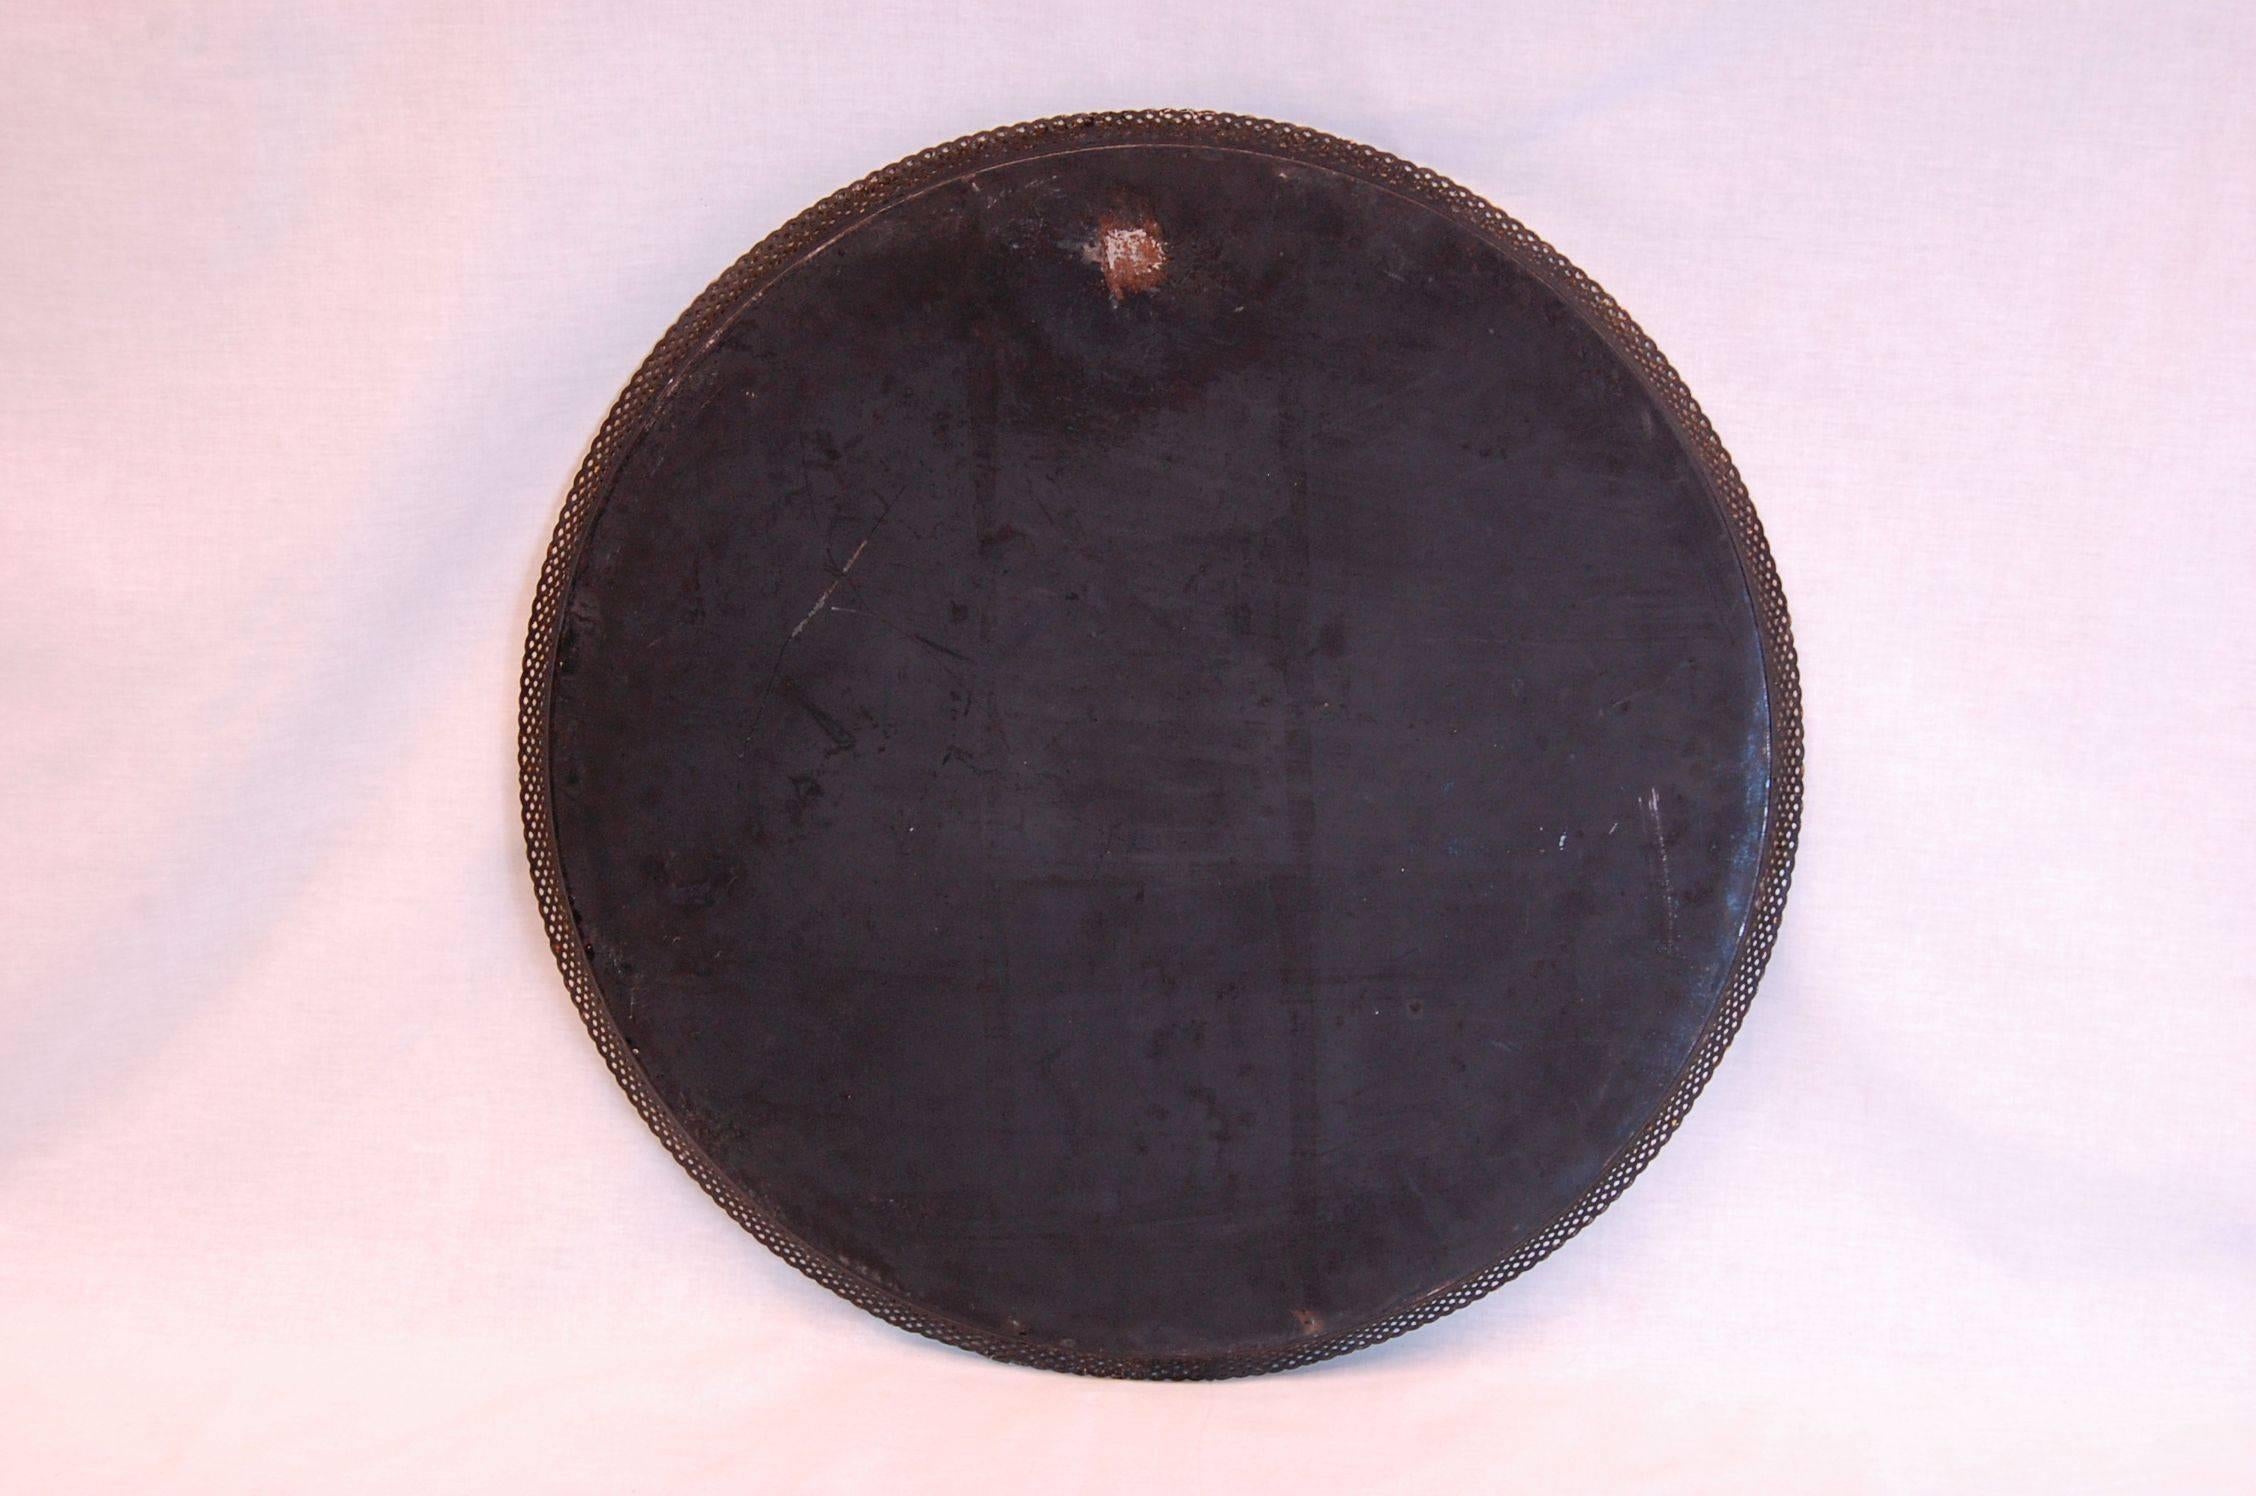 Steel Large Floral Painted Circular Tole Tray on Black Lacquered Base, circa 1860